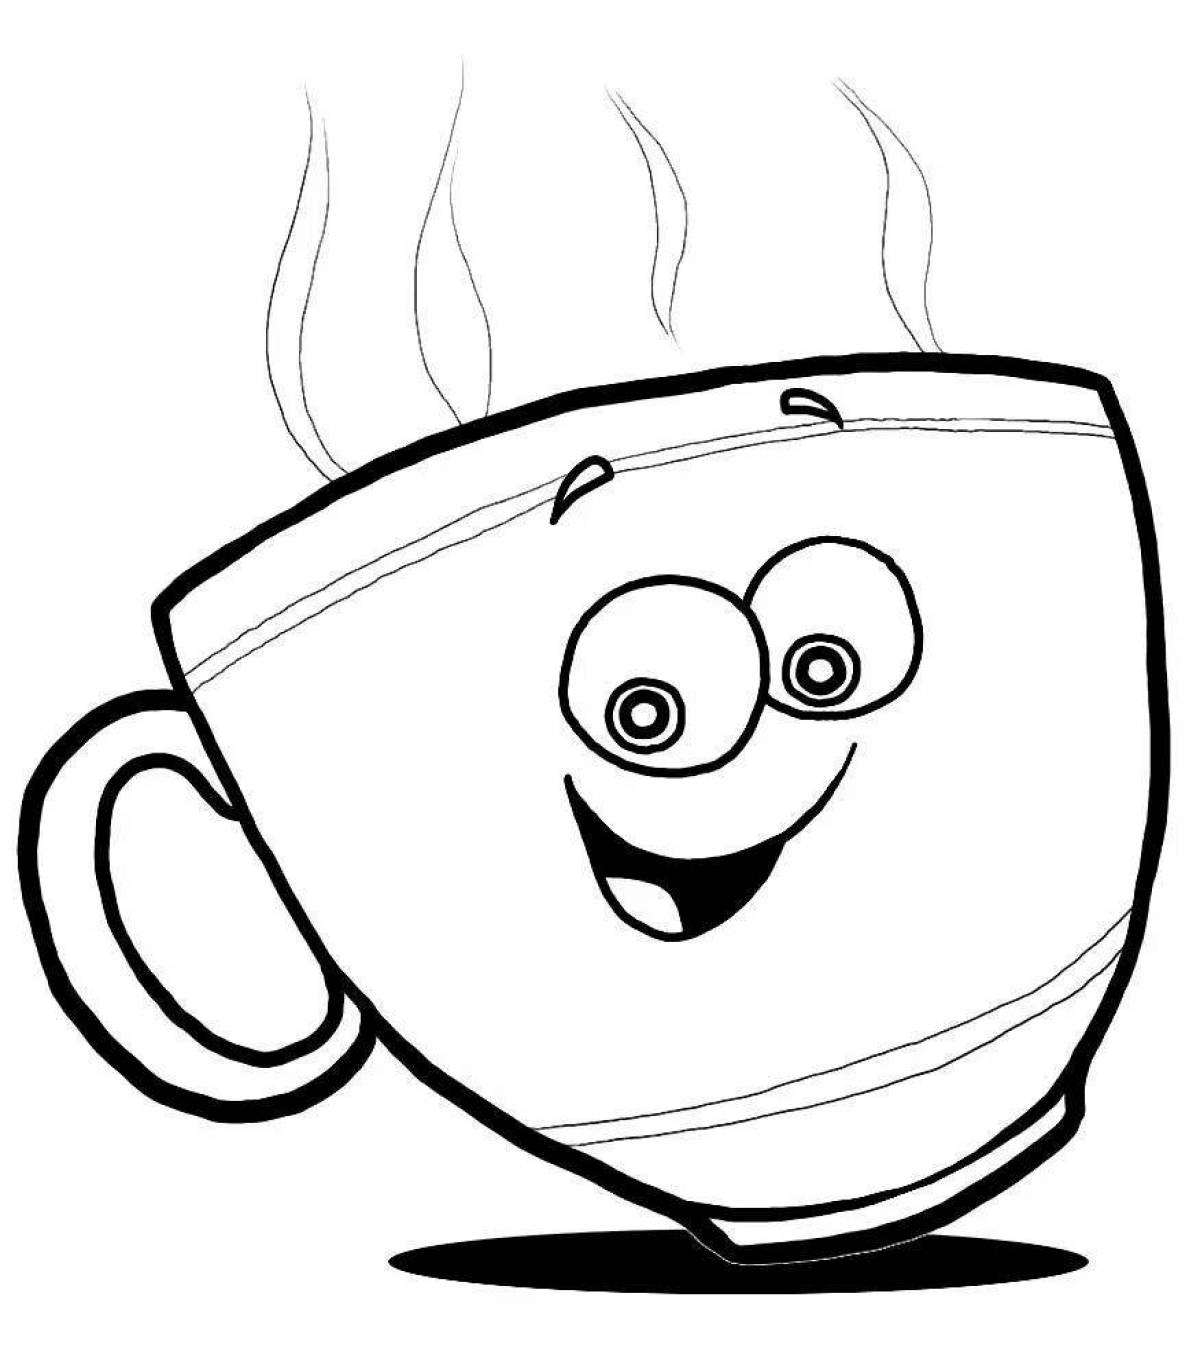 Glowing tea cup coloring page